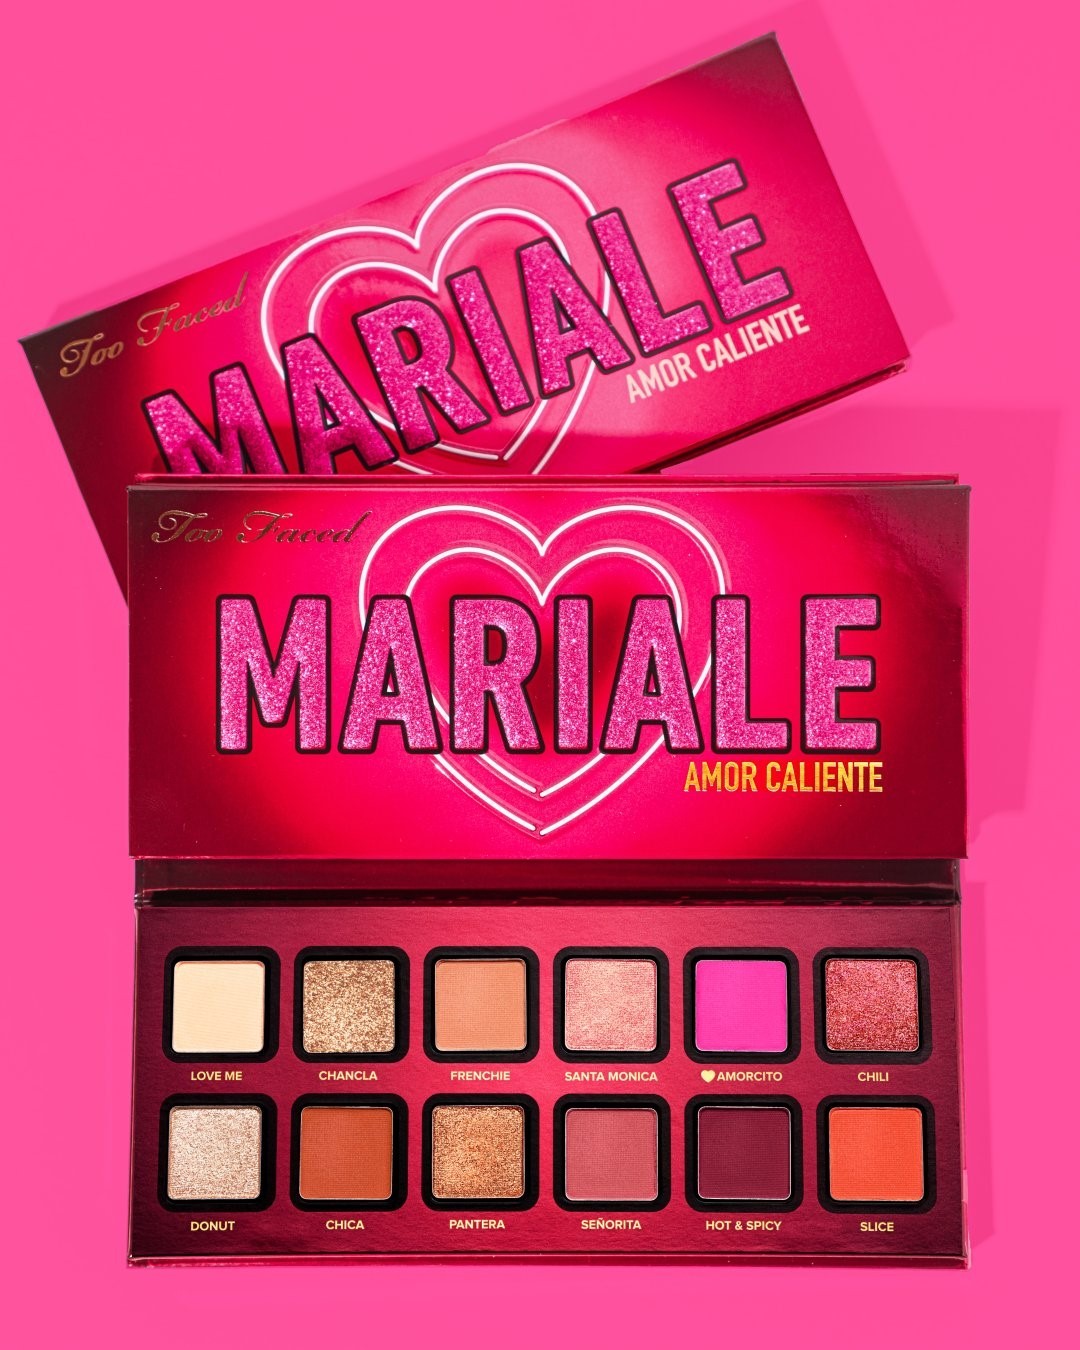 Too Faced Cosmetics - Have you heard?! 🚨 We just launched the HOTTEST #TooFacedxMariale Collab with our BFF @Mariale! 🔥 The Amor Caliente Palette is packed with bold colors that push boundaries & insp...